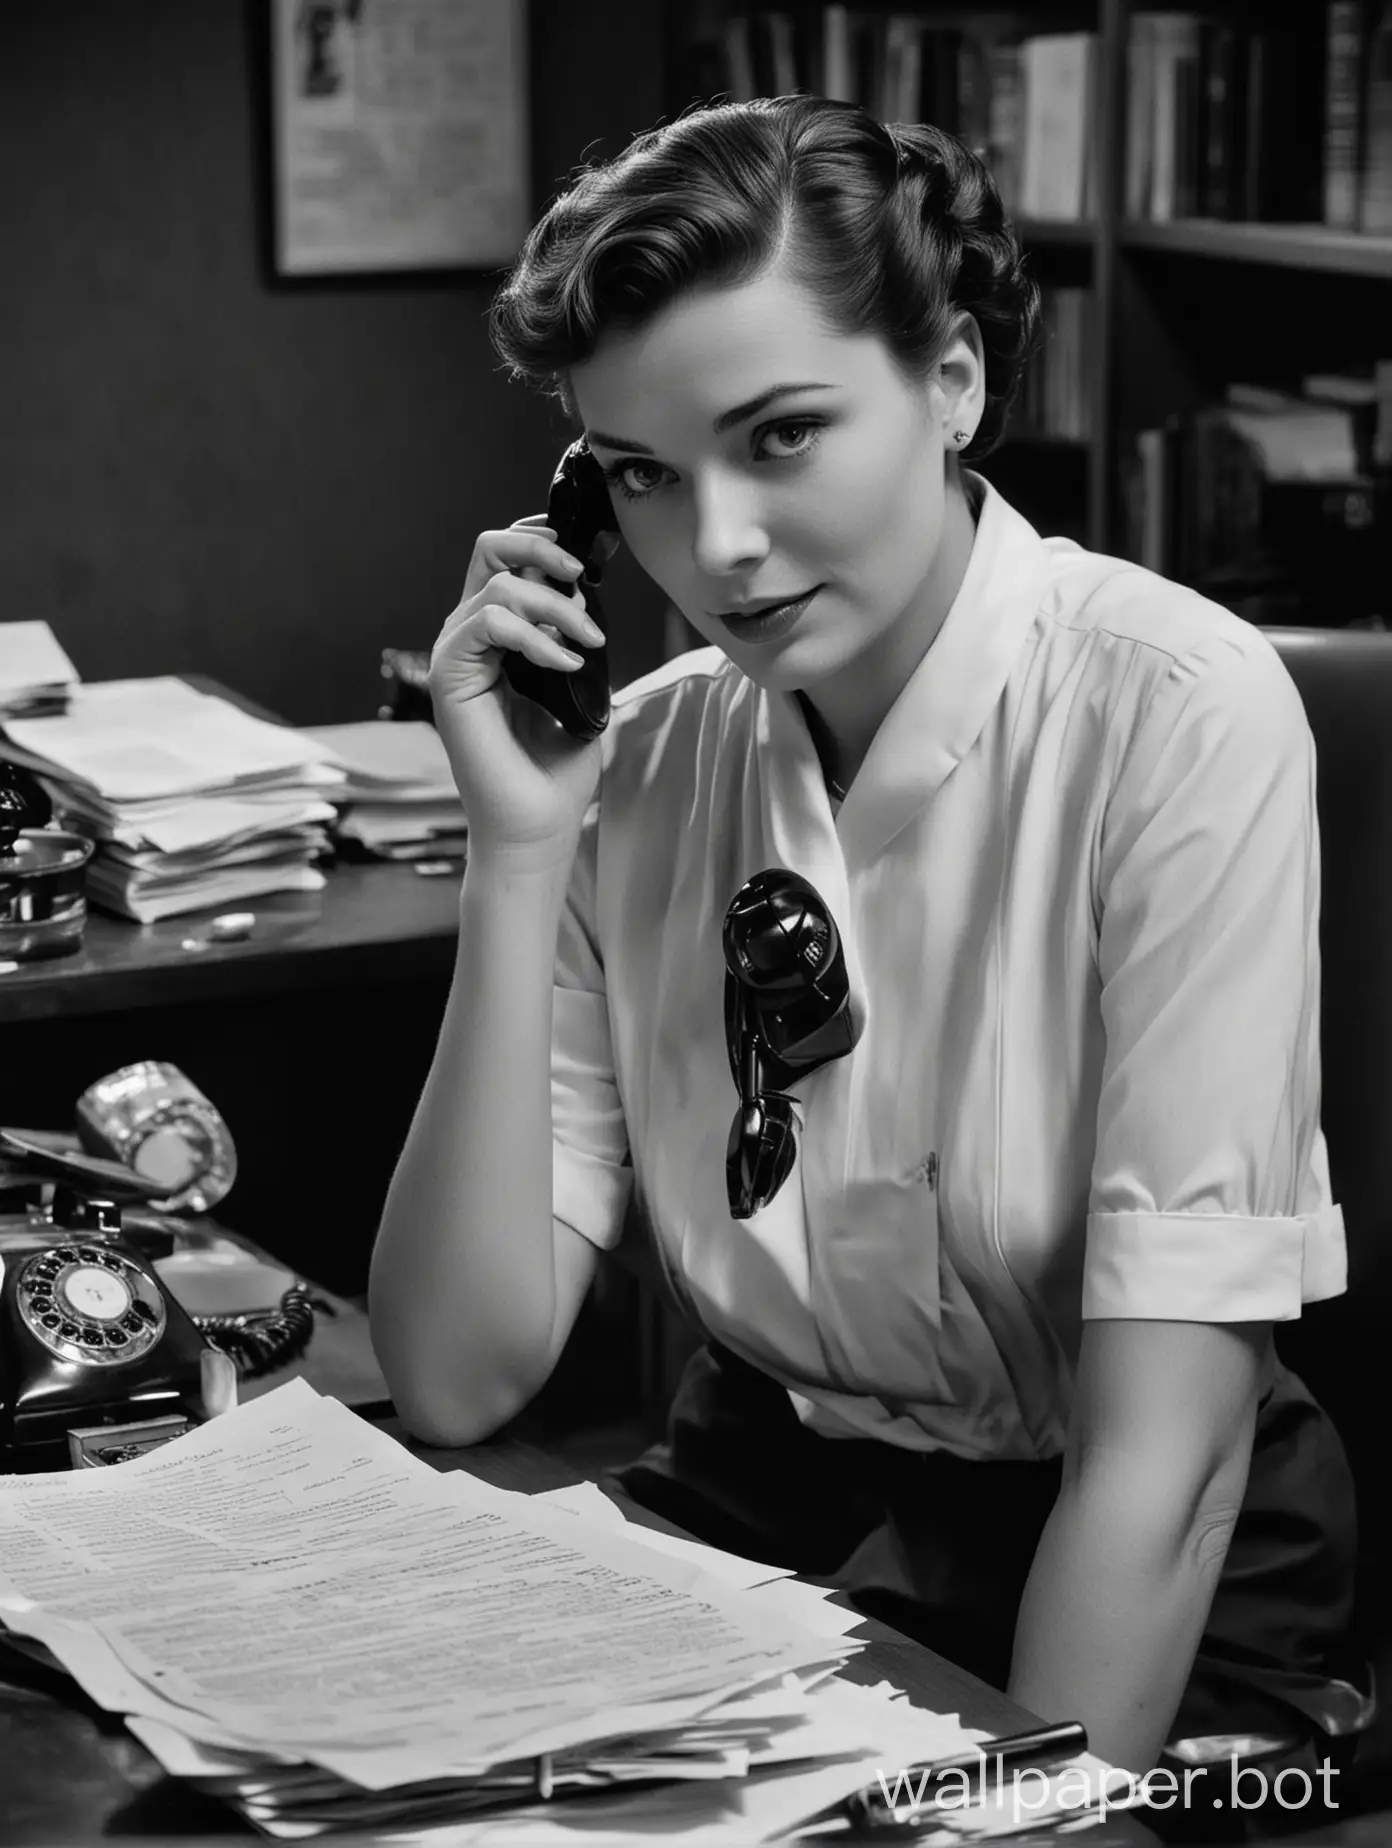 Vintage black and white photograph of an elegant woman from the 1950s at her desk, talking to someone over the phone in a front view. She is wearing a simple dress with short hair tied back, facing forward directly at the camera. The scene captures candid moments during work as she has one hand holding the telephone aerial while her other hand is busy working behind the office table. In the table there is a seafood cocktail and a manu paper spilled with a little sause. Her expression reflects focus or attention while watching something. Black background. Shot in the style of 'Super stock' photography.